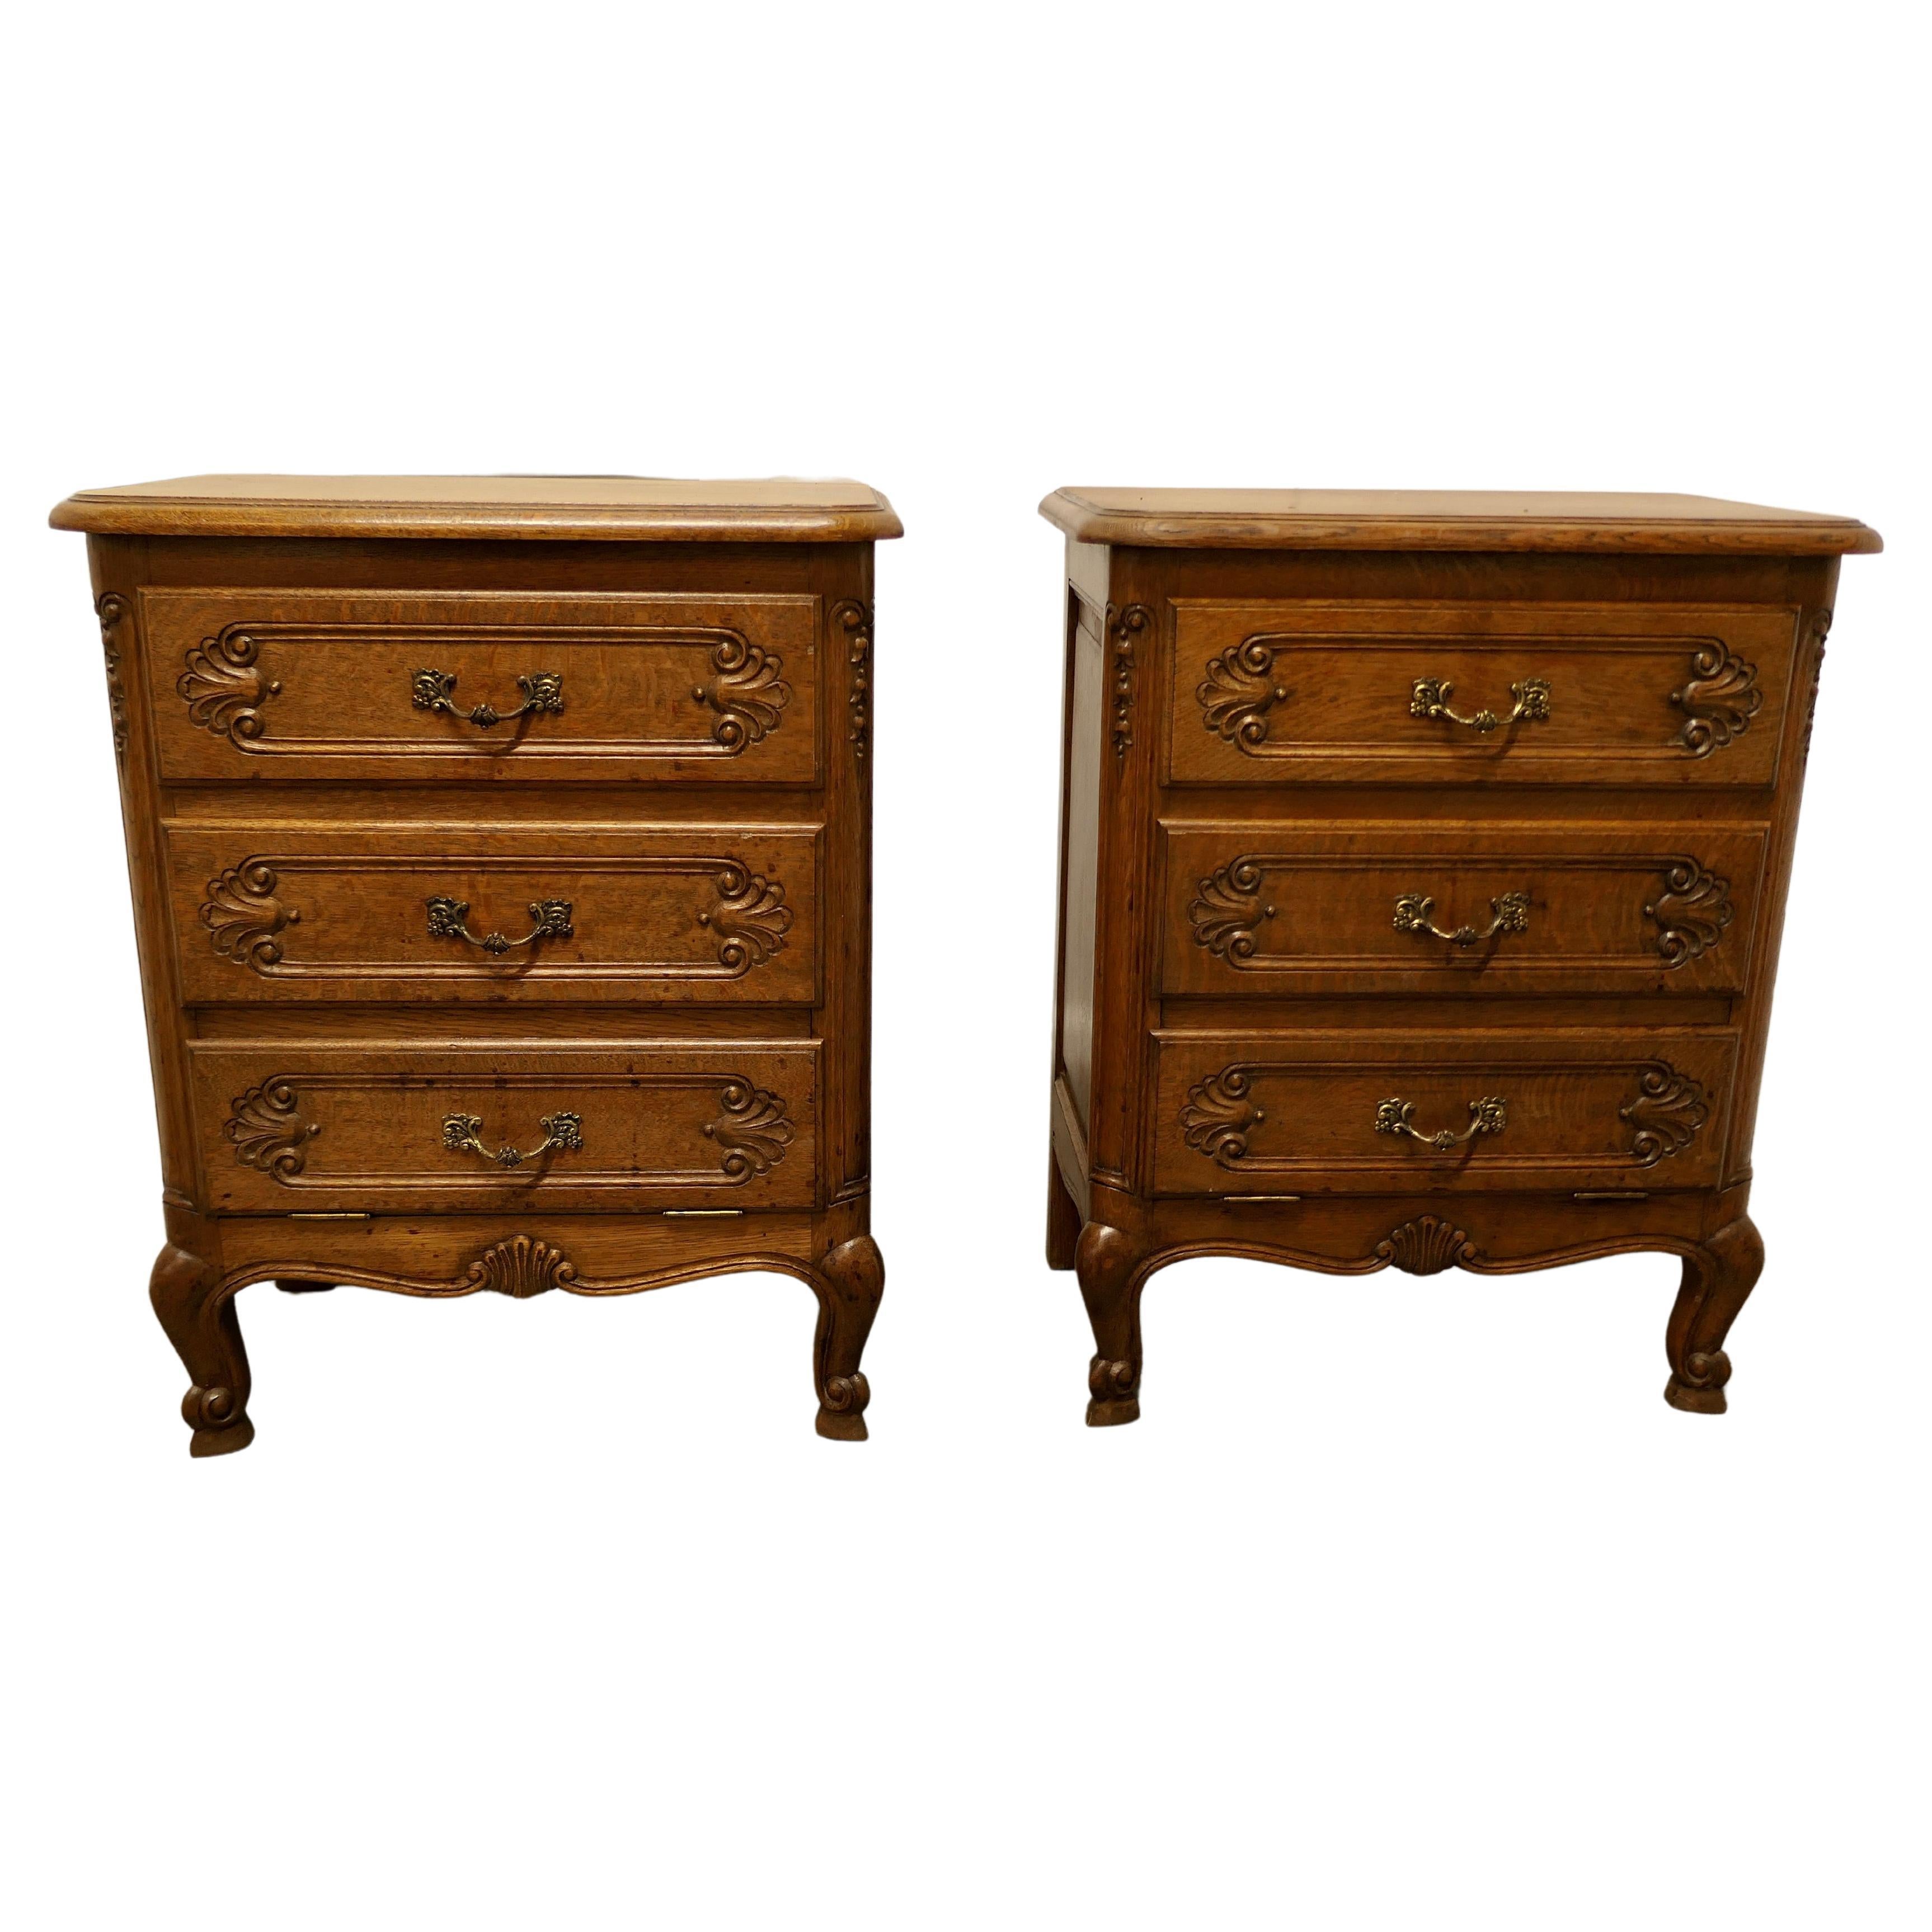 A Pair of Small French Golden Oak Chests of Drawers    For Sale